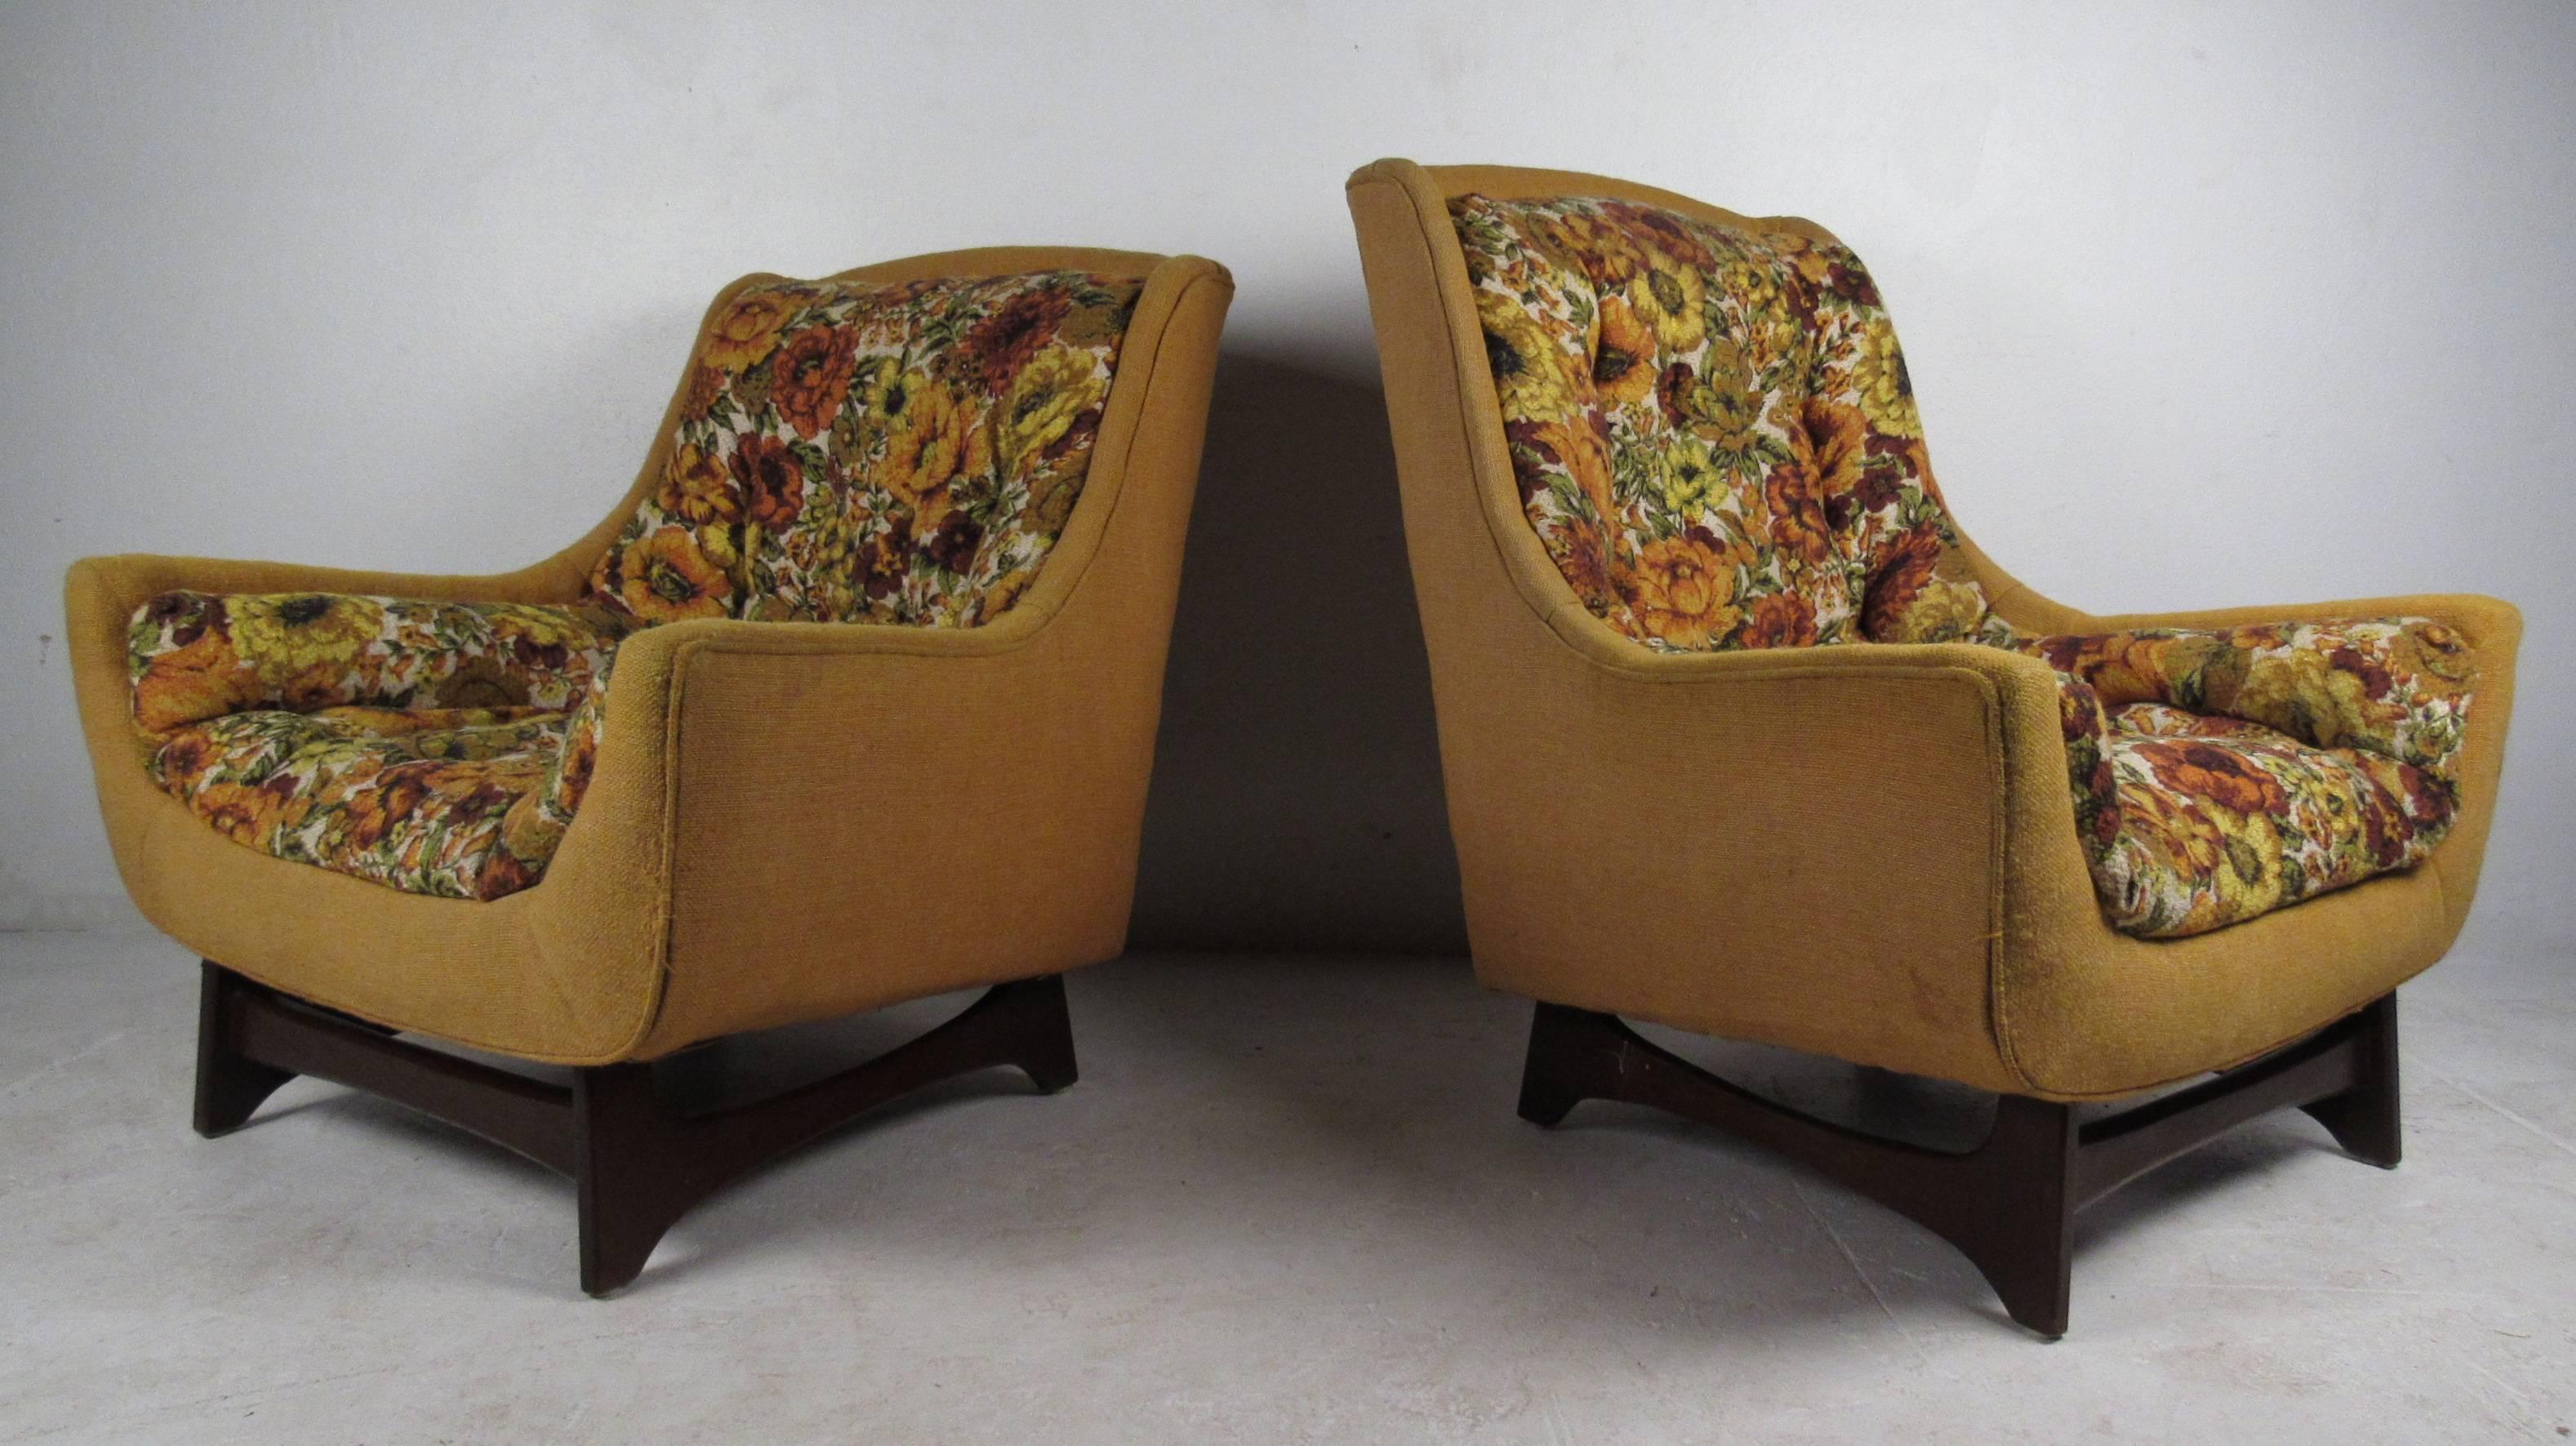 American Mid-Century Modern His and Her Style Lounge Chairs